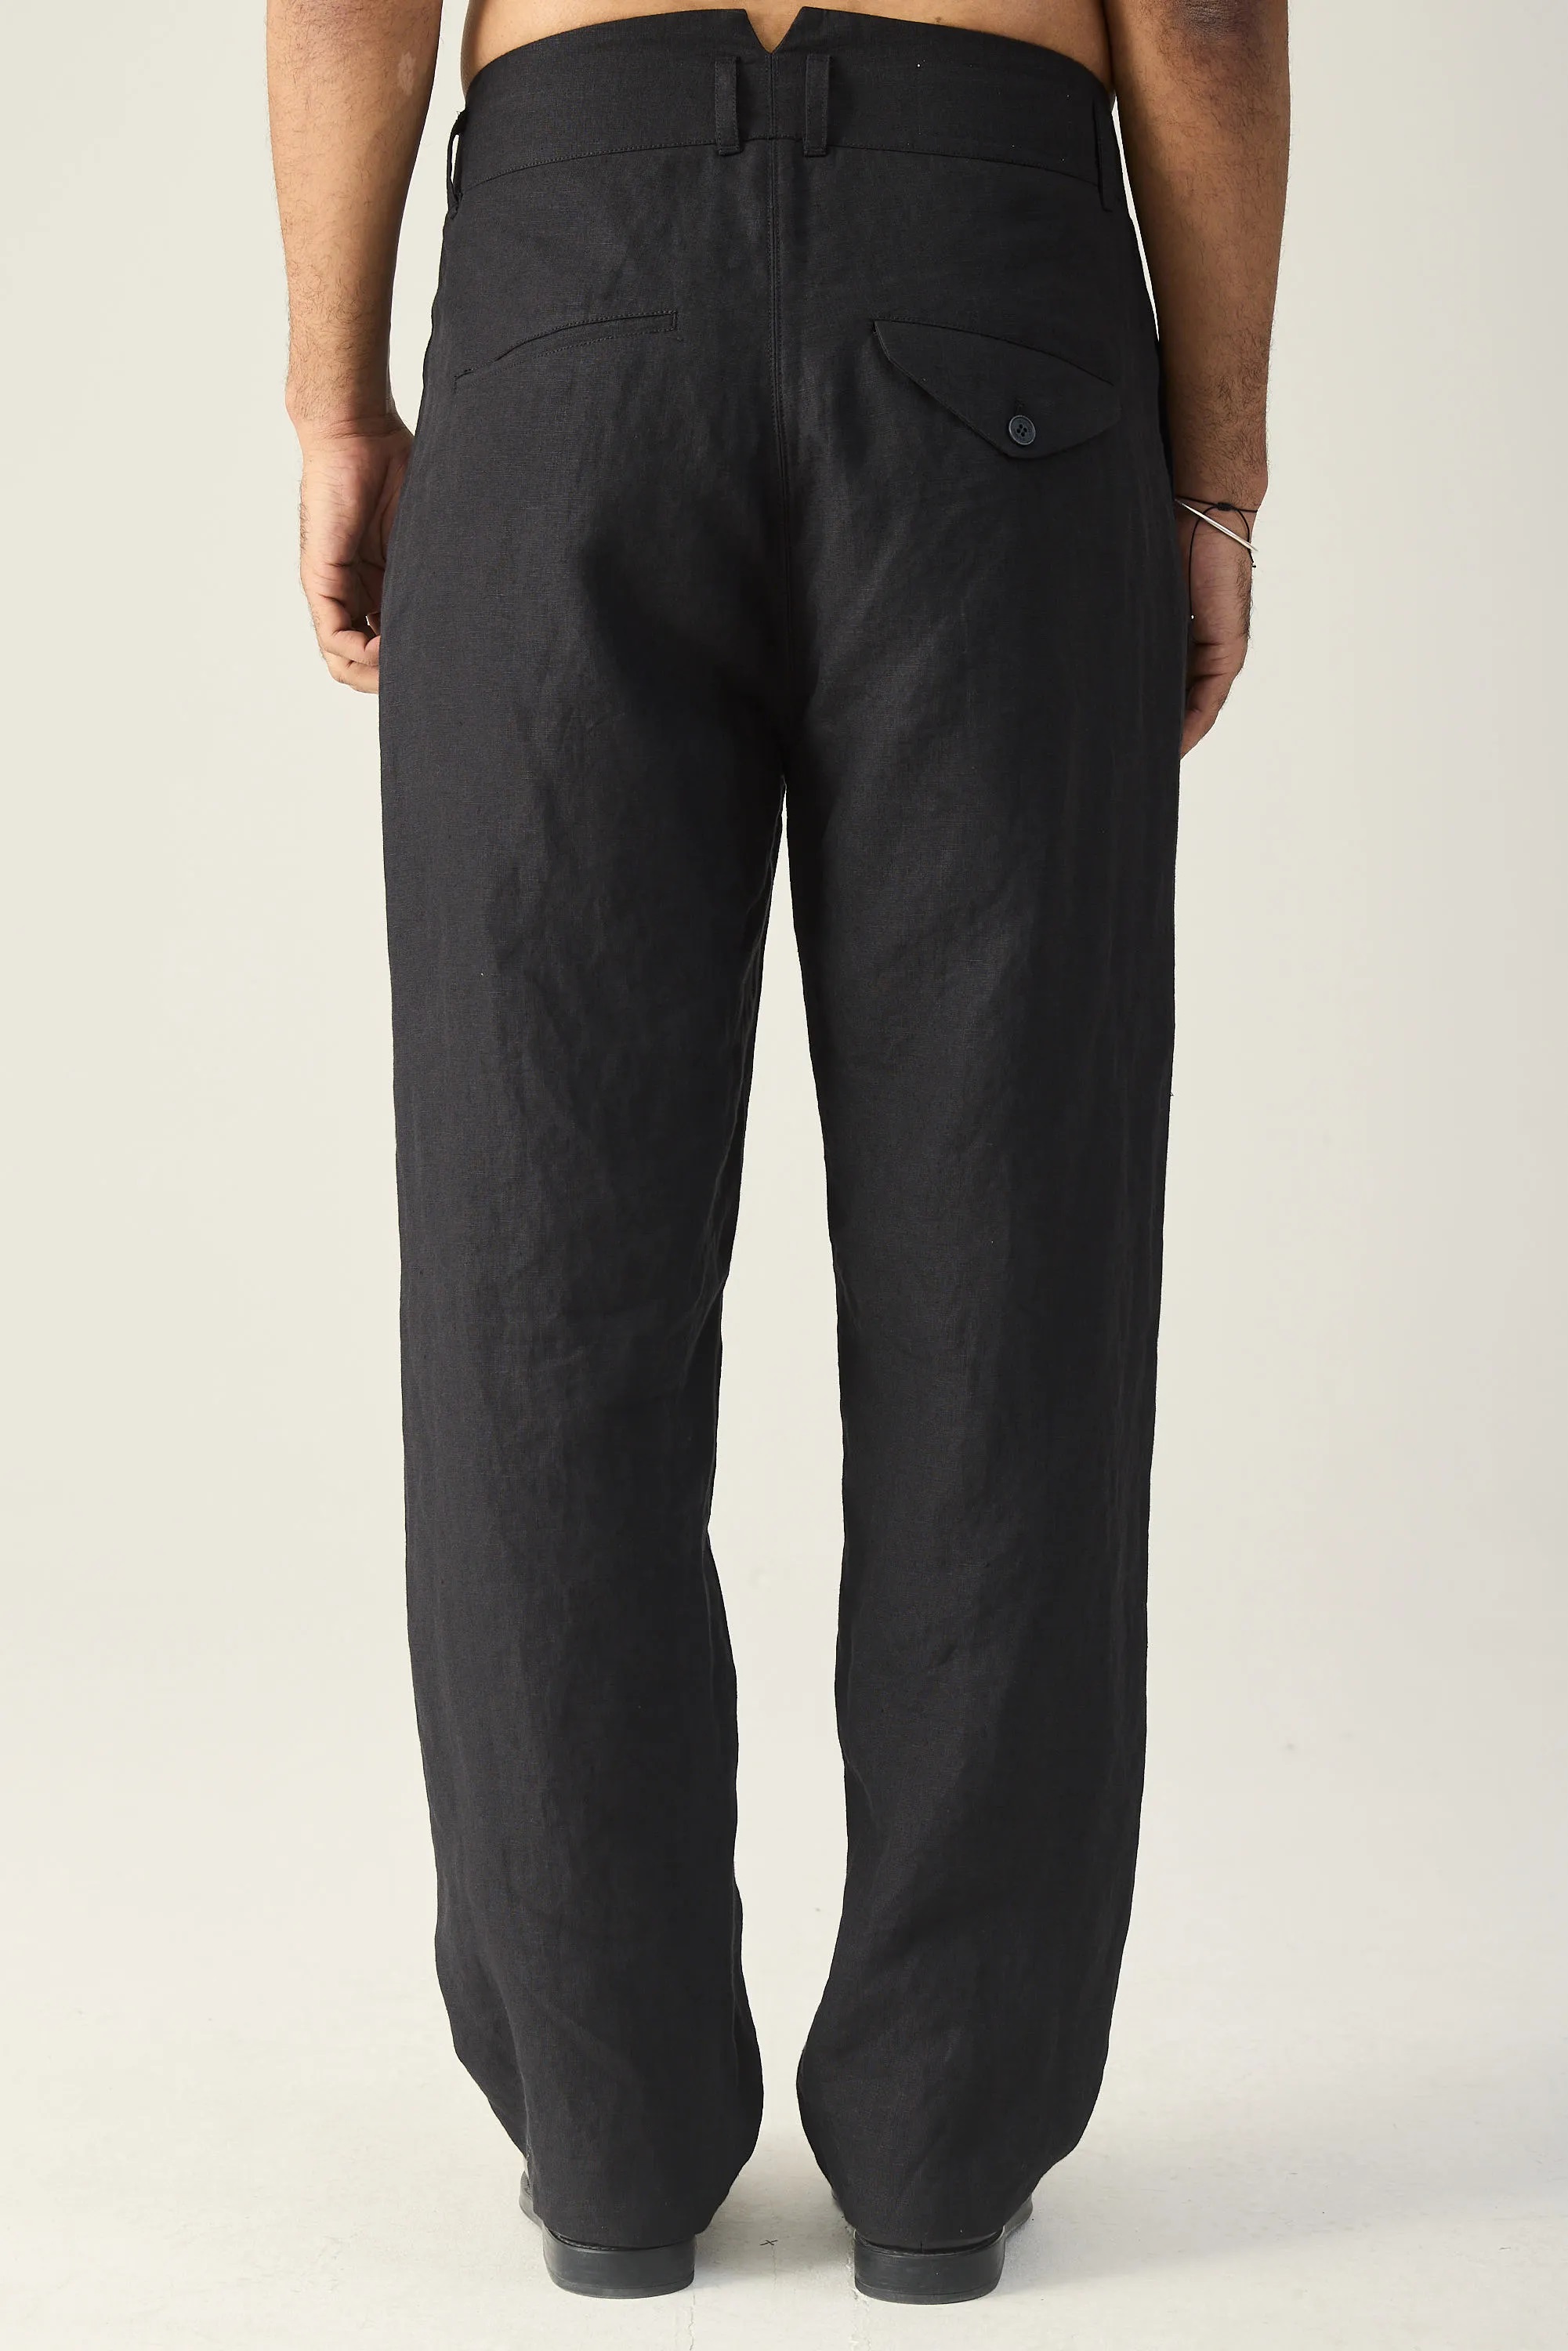 HANNIBAL. Trouser Heli in Washed Black 46